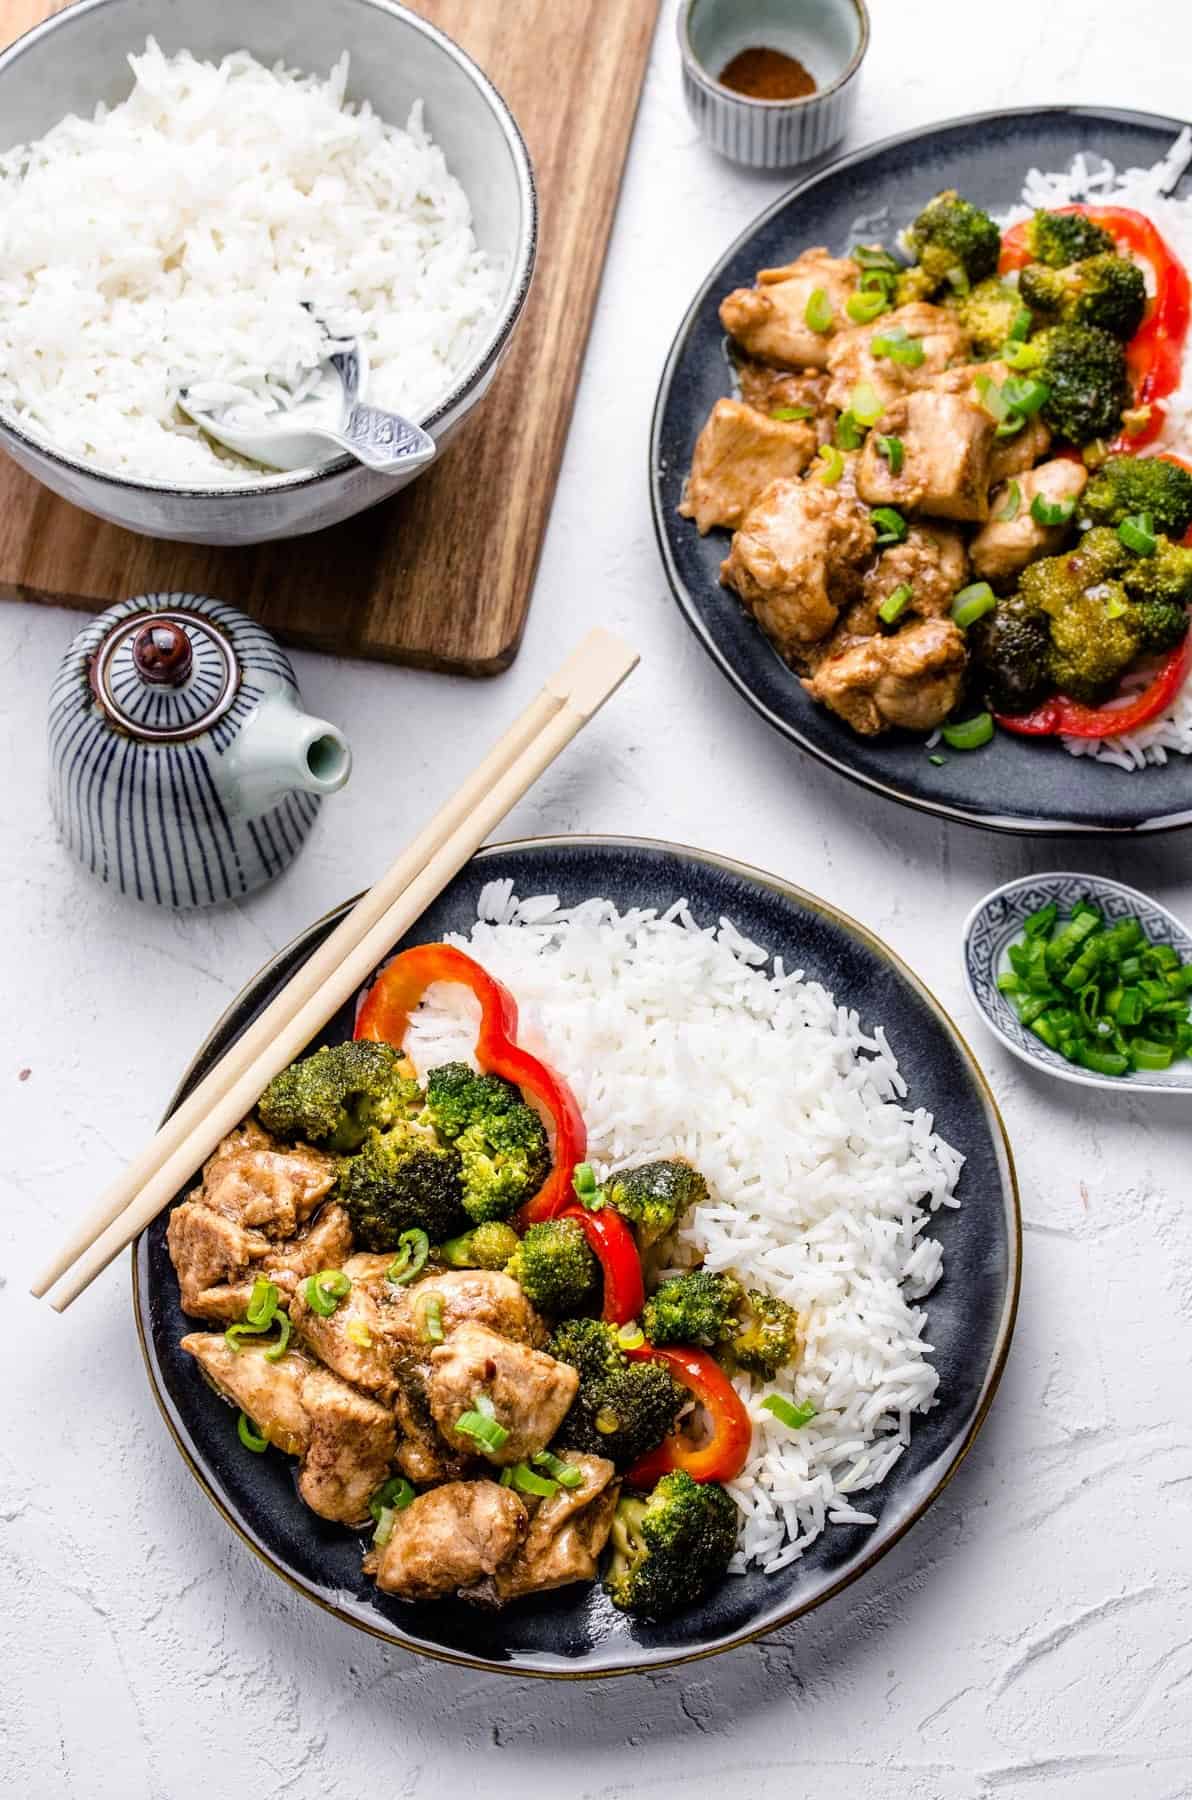 A plate of chicken, rice and vegetables beside a small teapot.